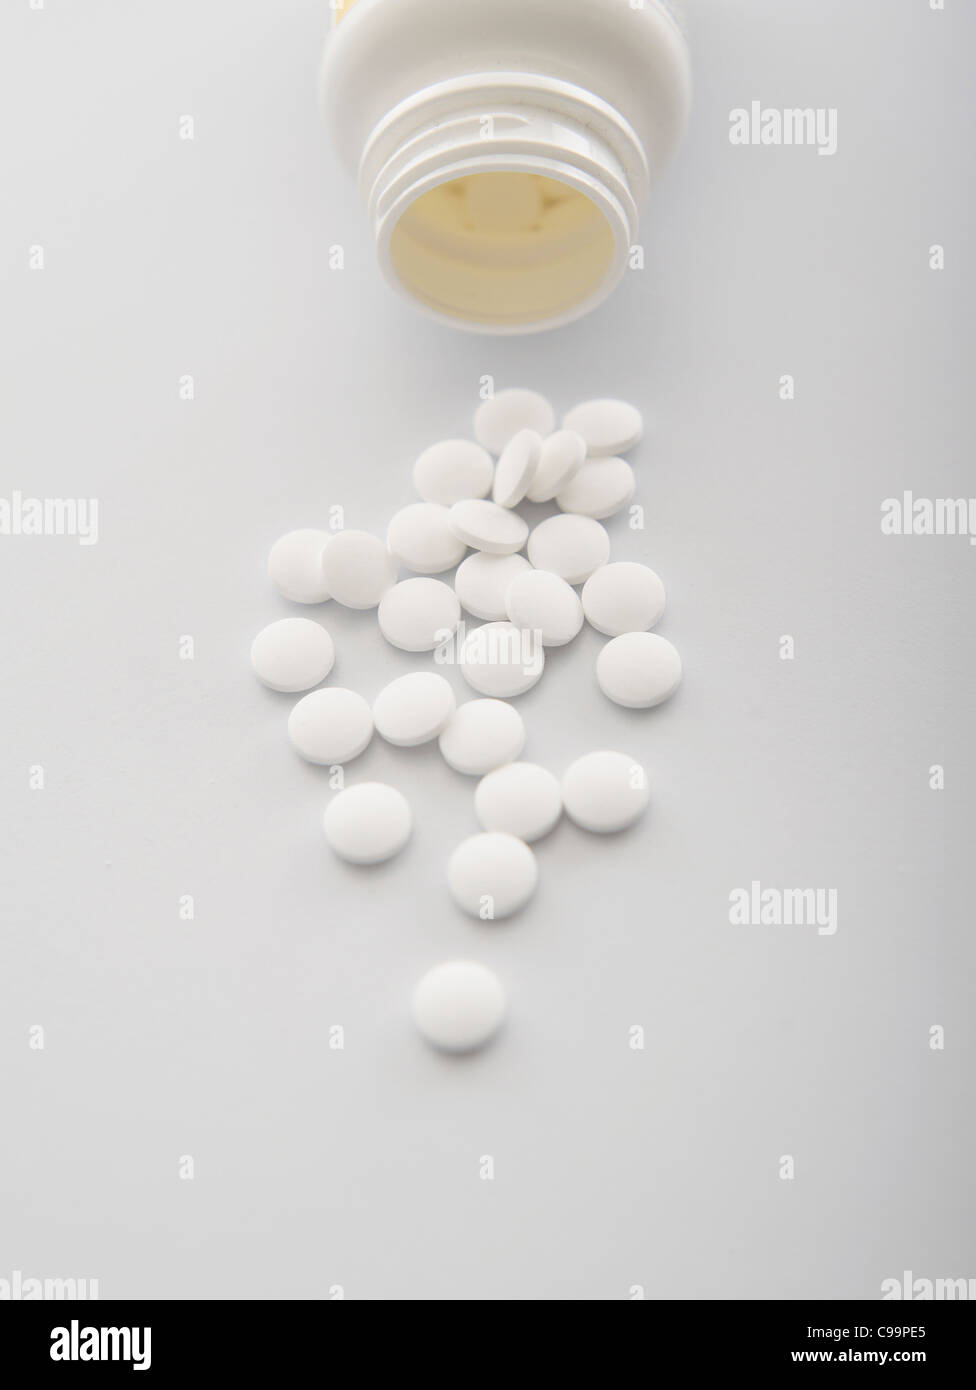 White pills spilling out of bottle, close-up Stock Photo